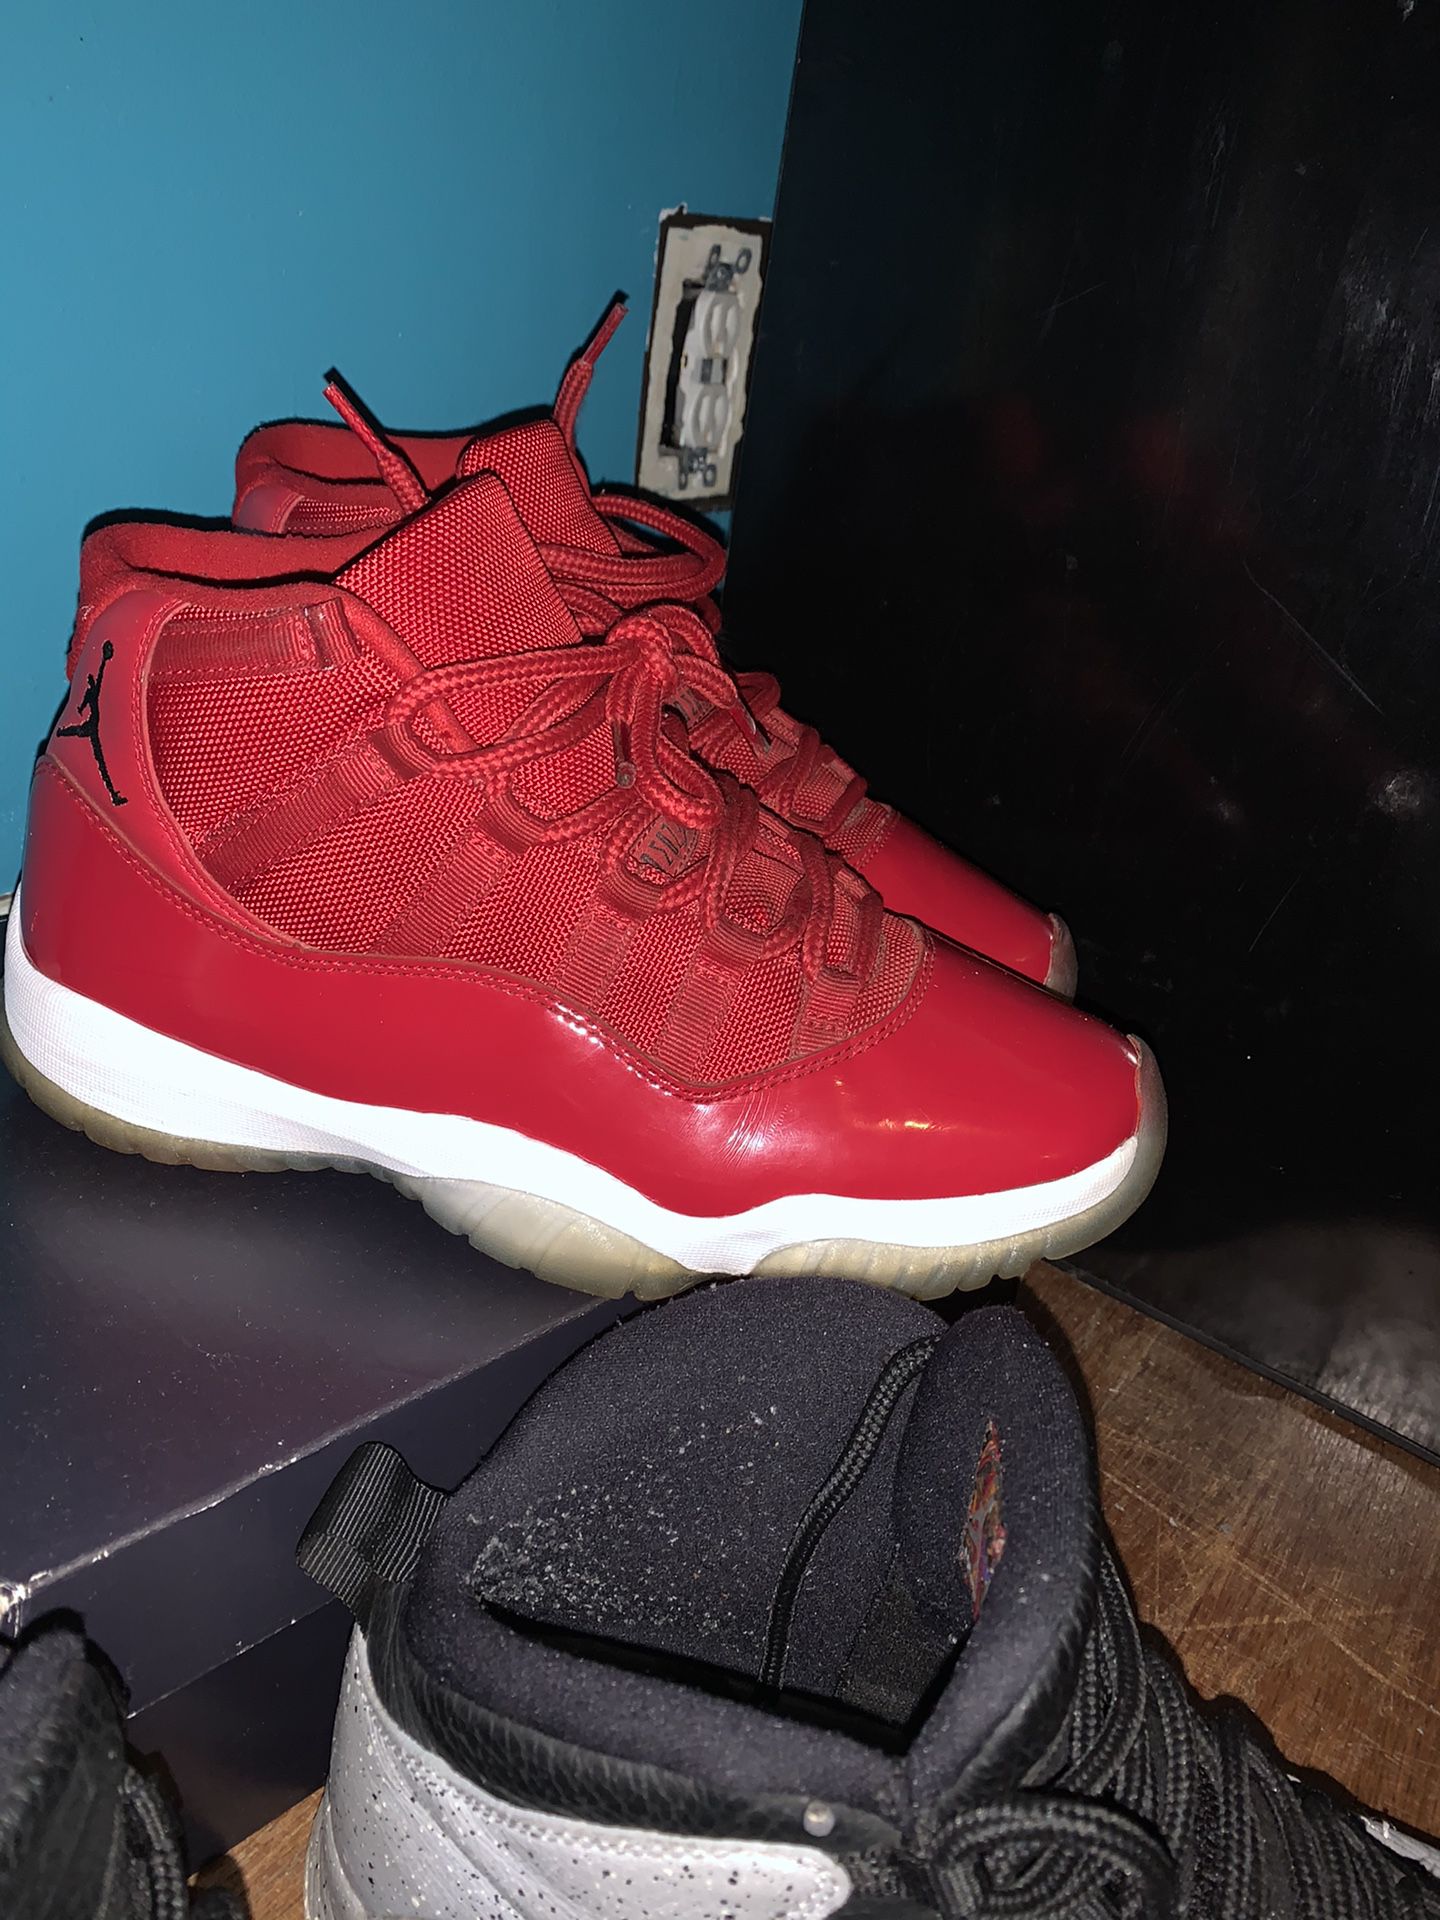 gym red 11s